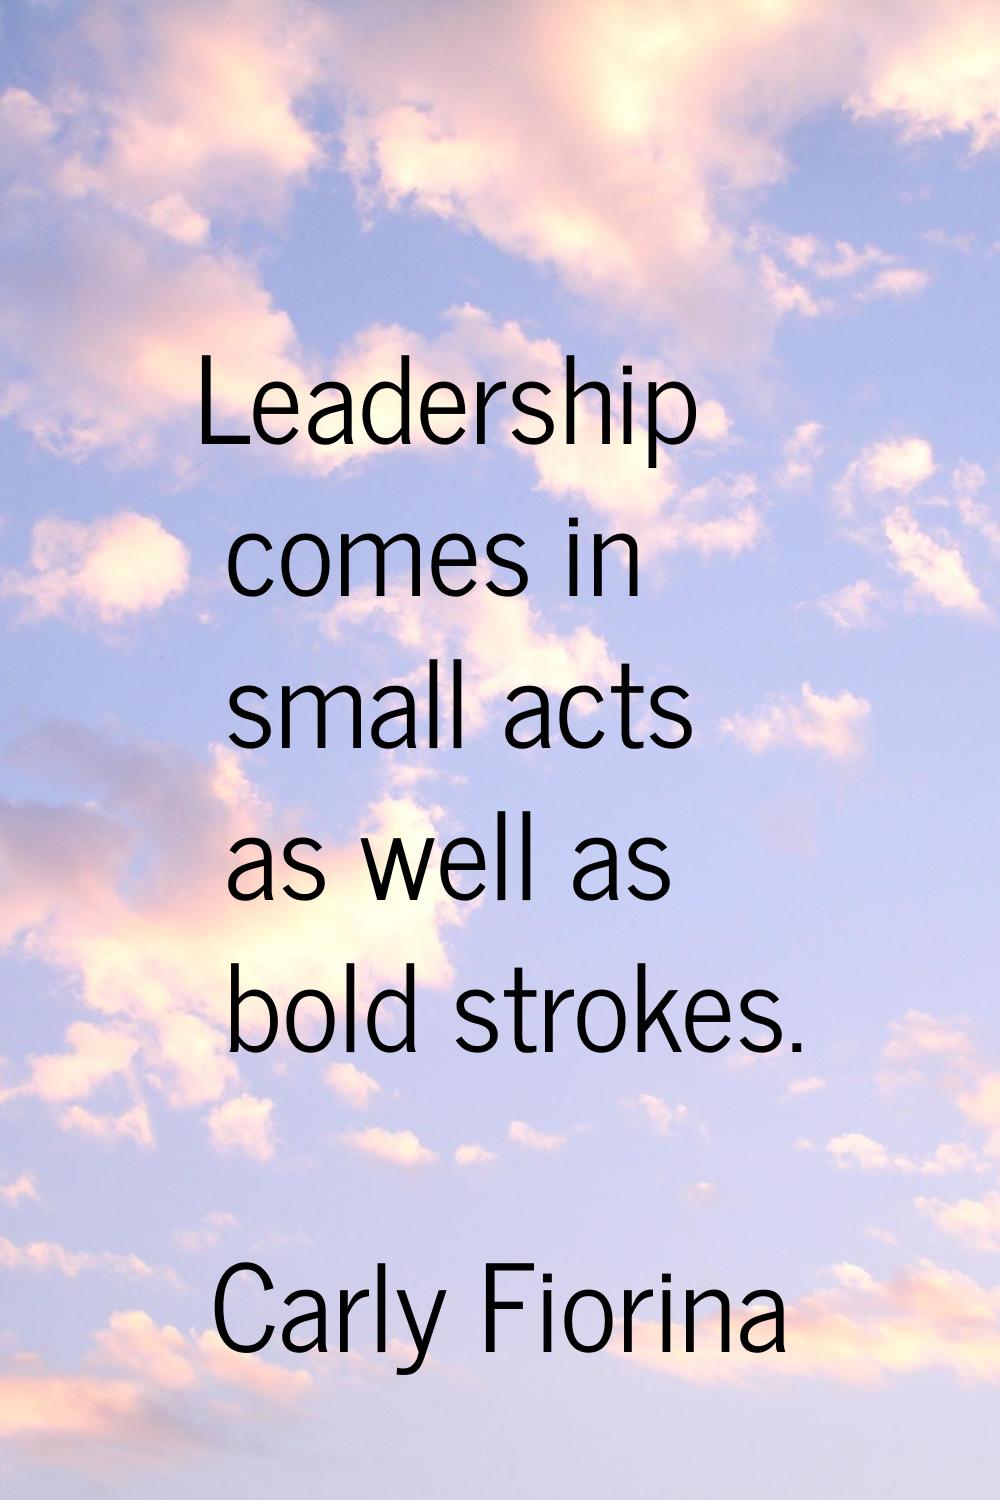 Leadership comes in small acts as well as bold strokes.